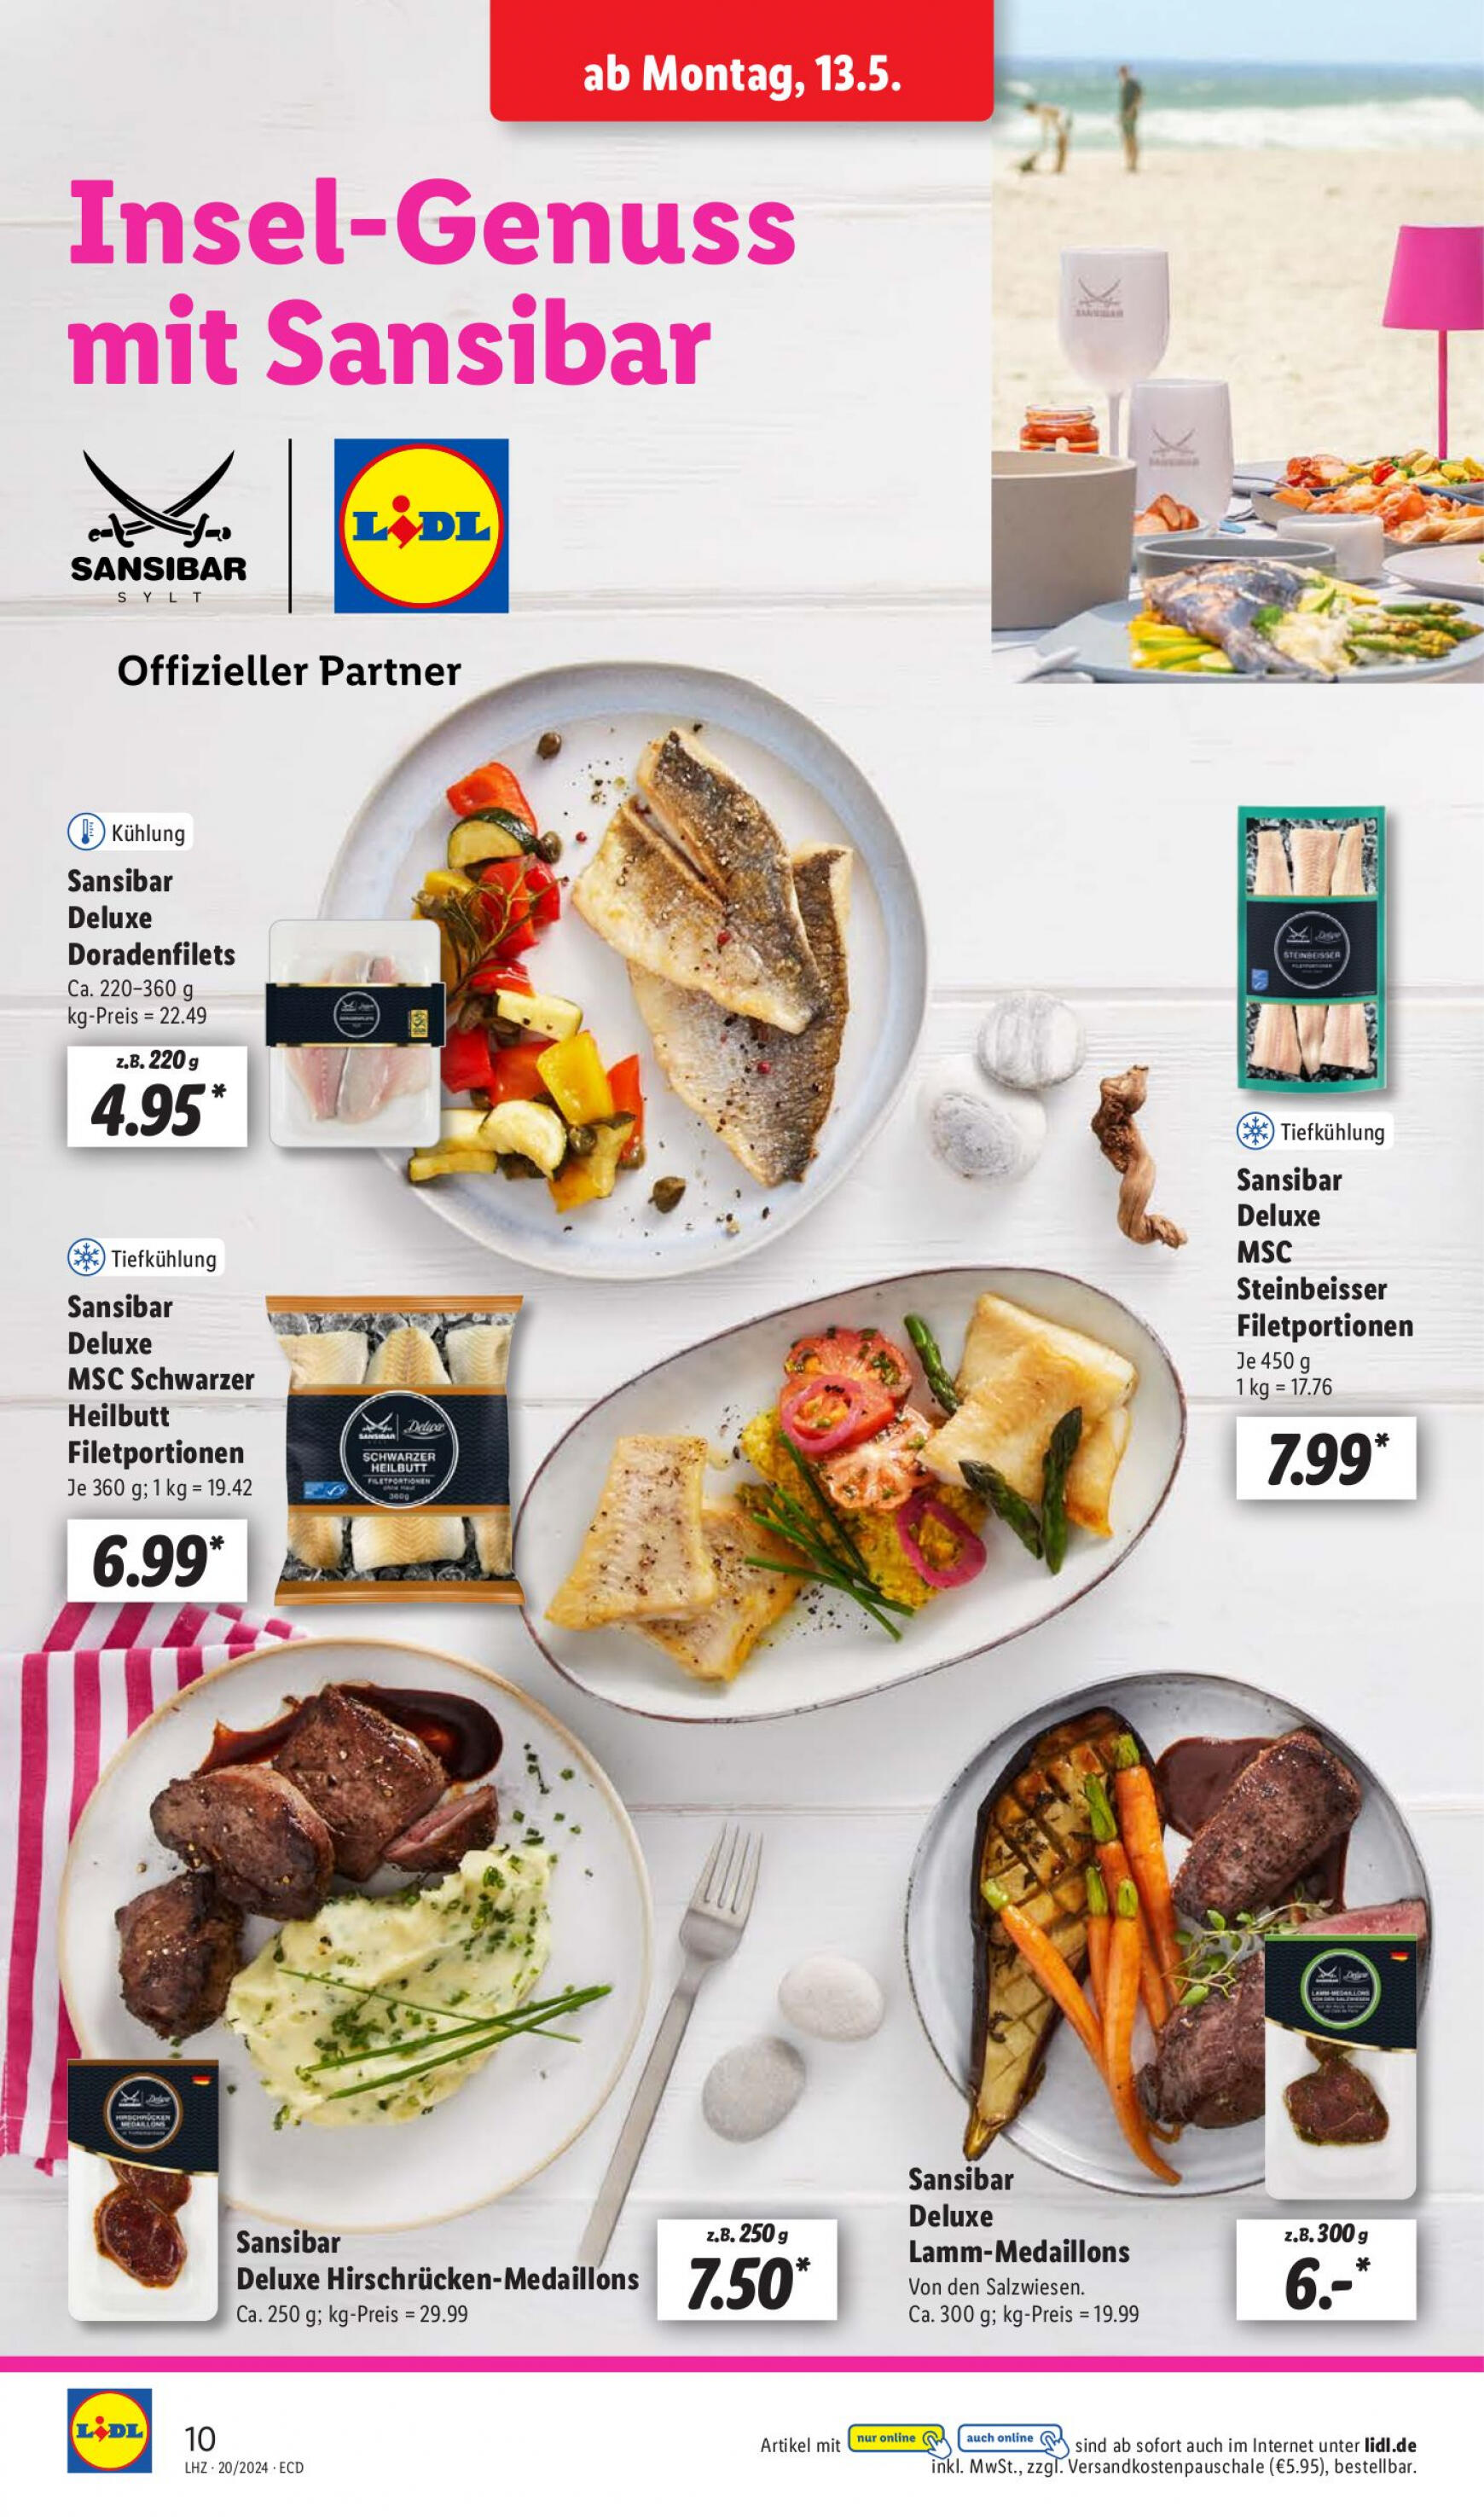 lidl - Flyer Lidl aktuell 13.05. - 18.05. - page: 12